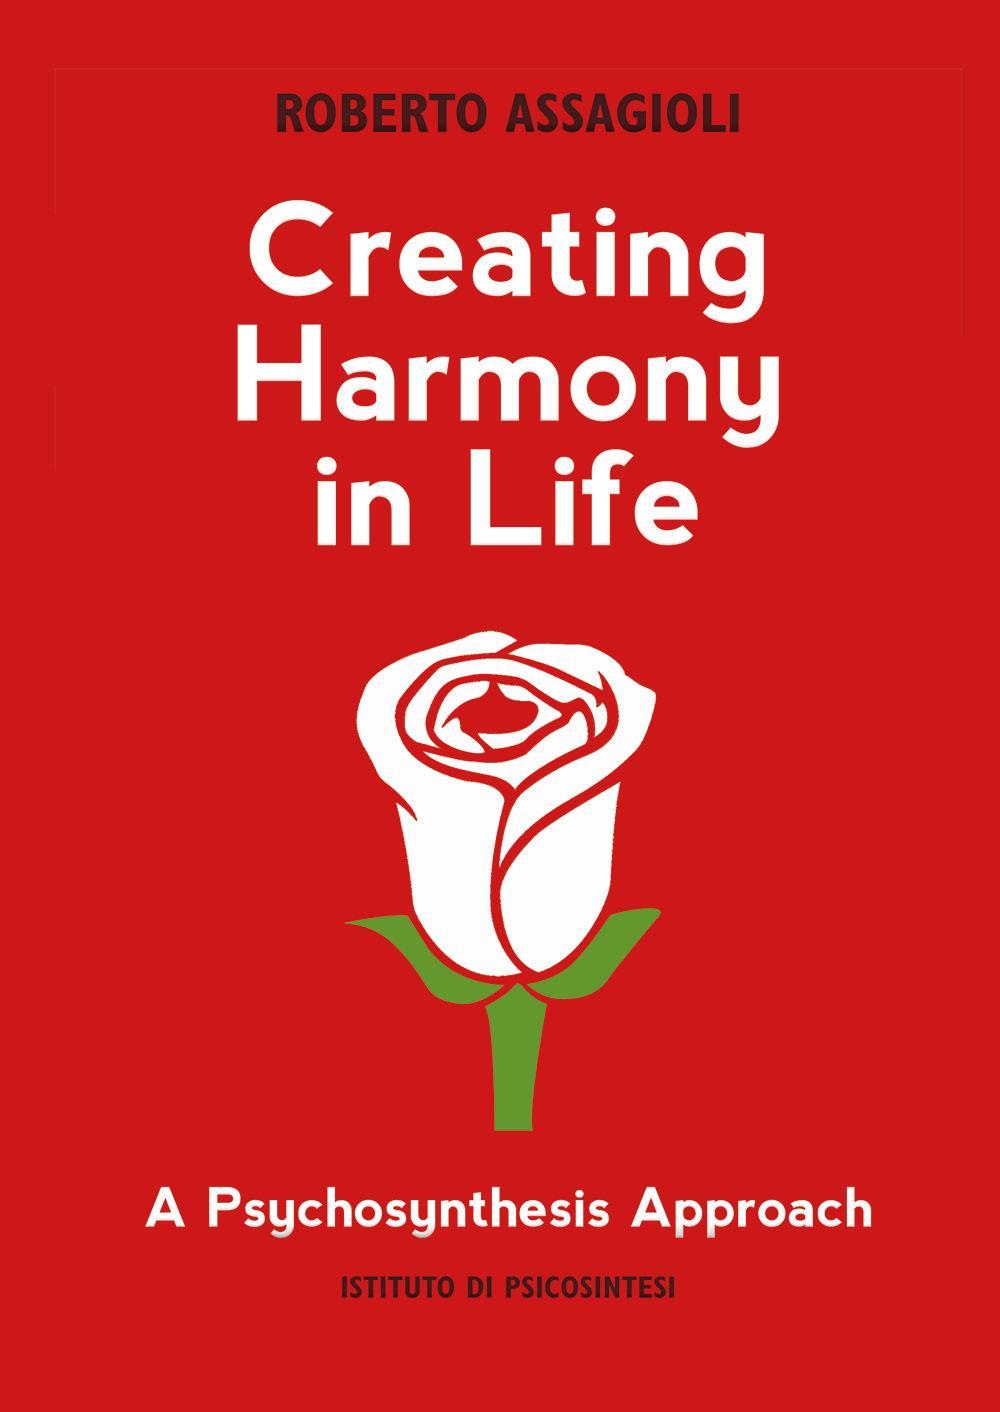 Creating Harmony in Life: a Psychosynthesis approach